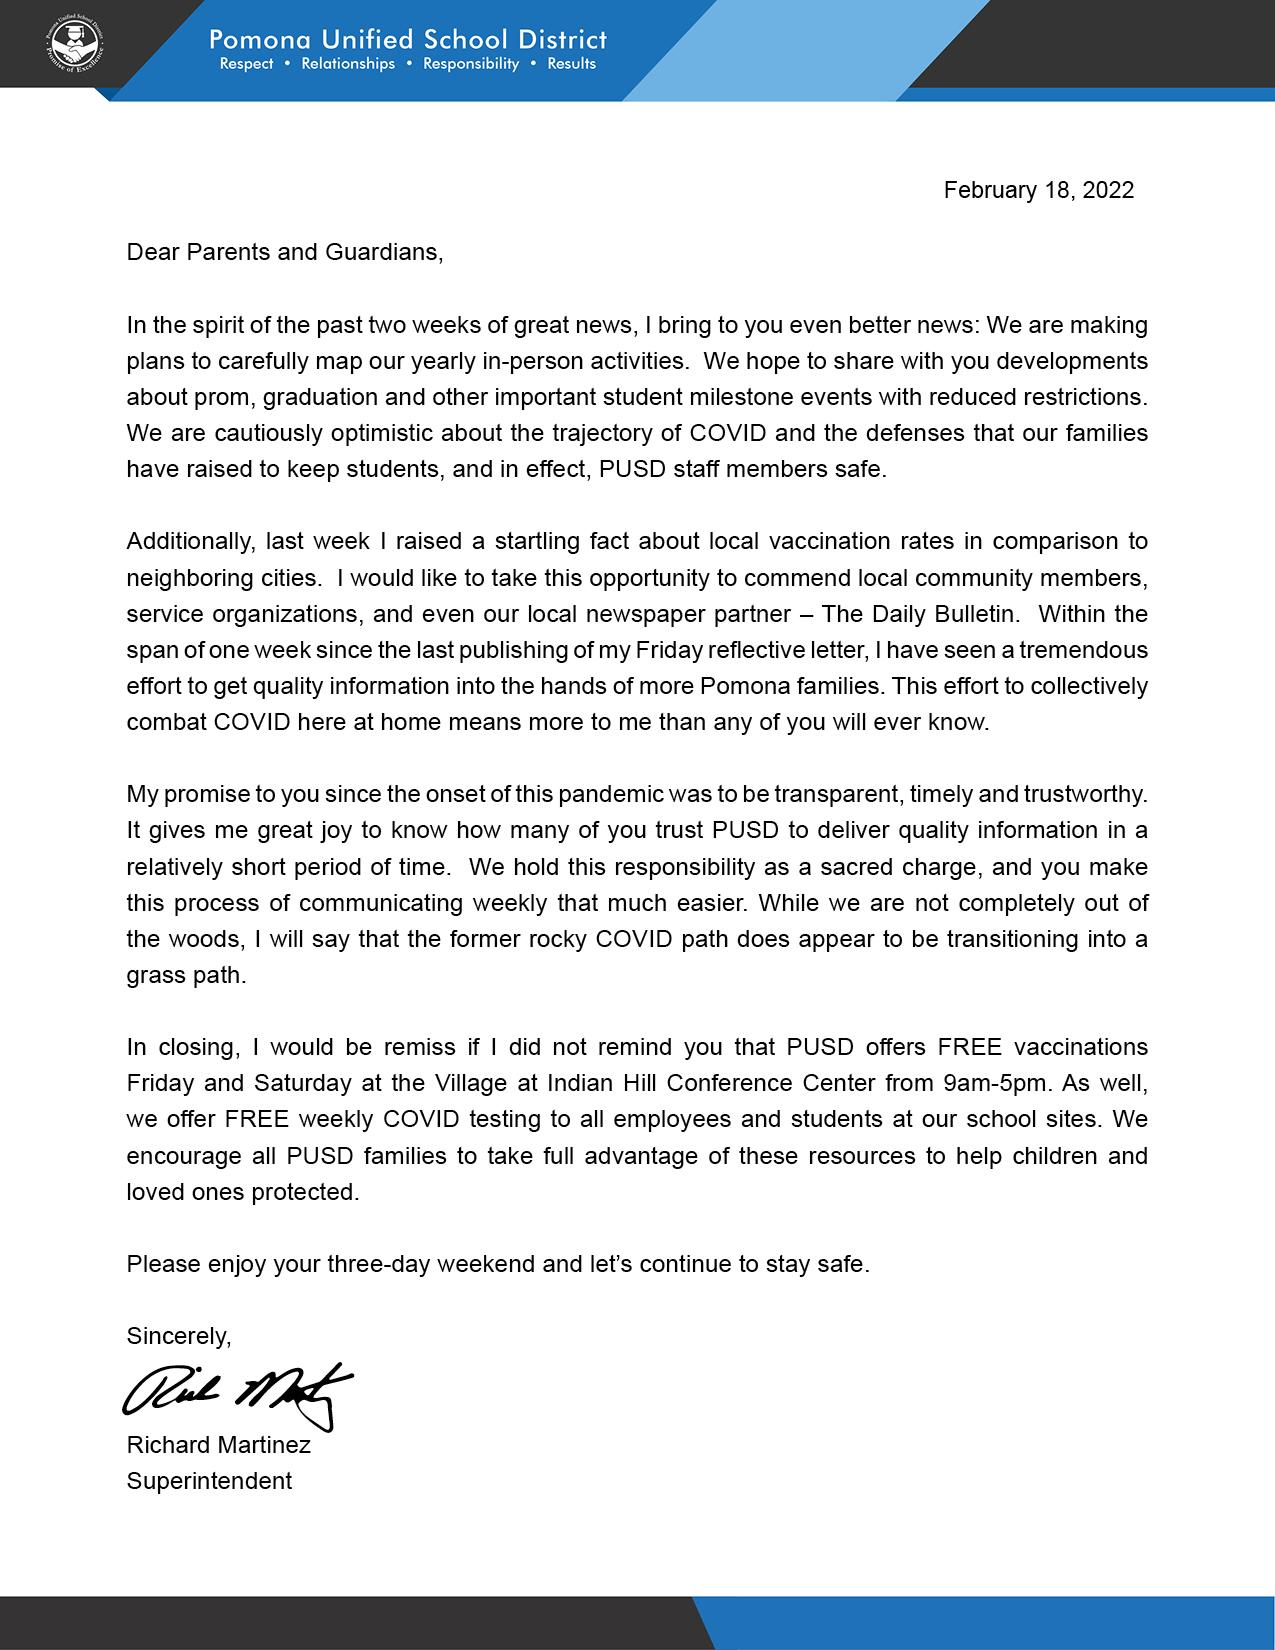 Supts update letter